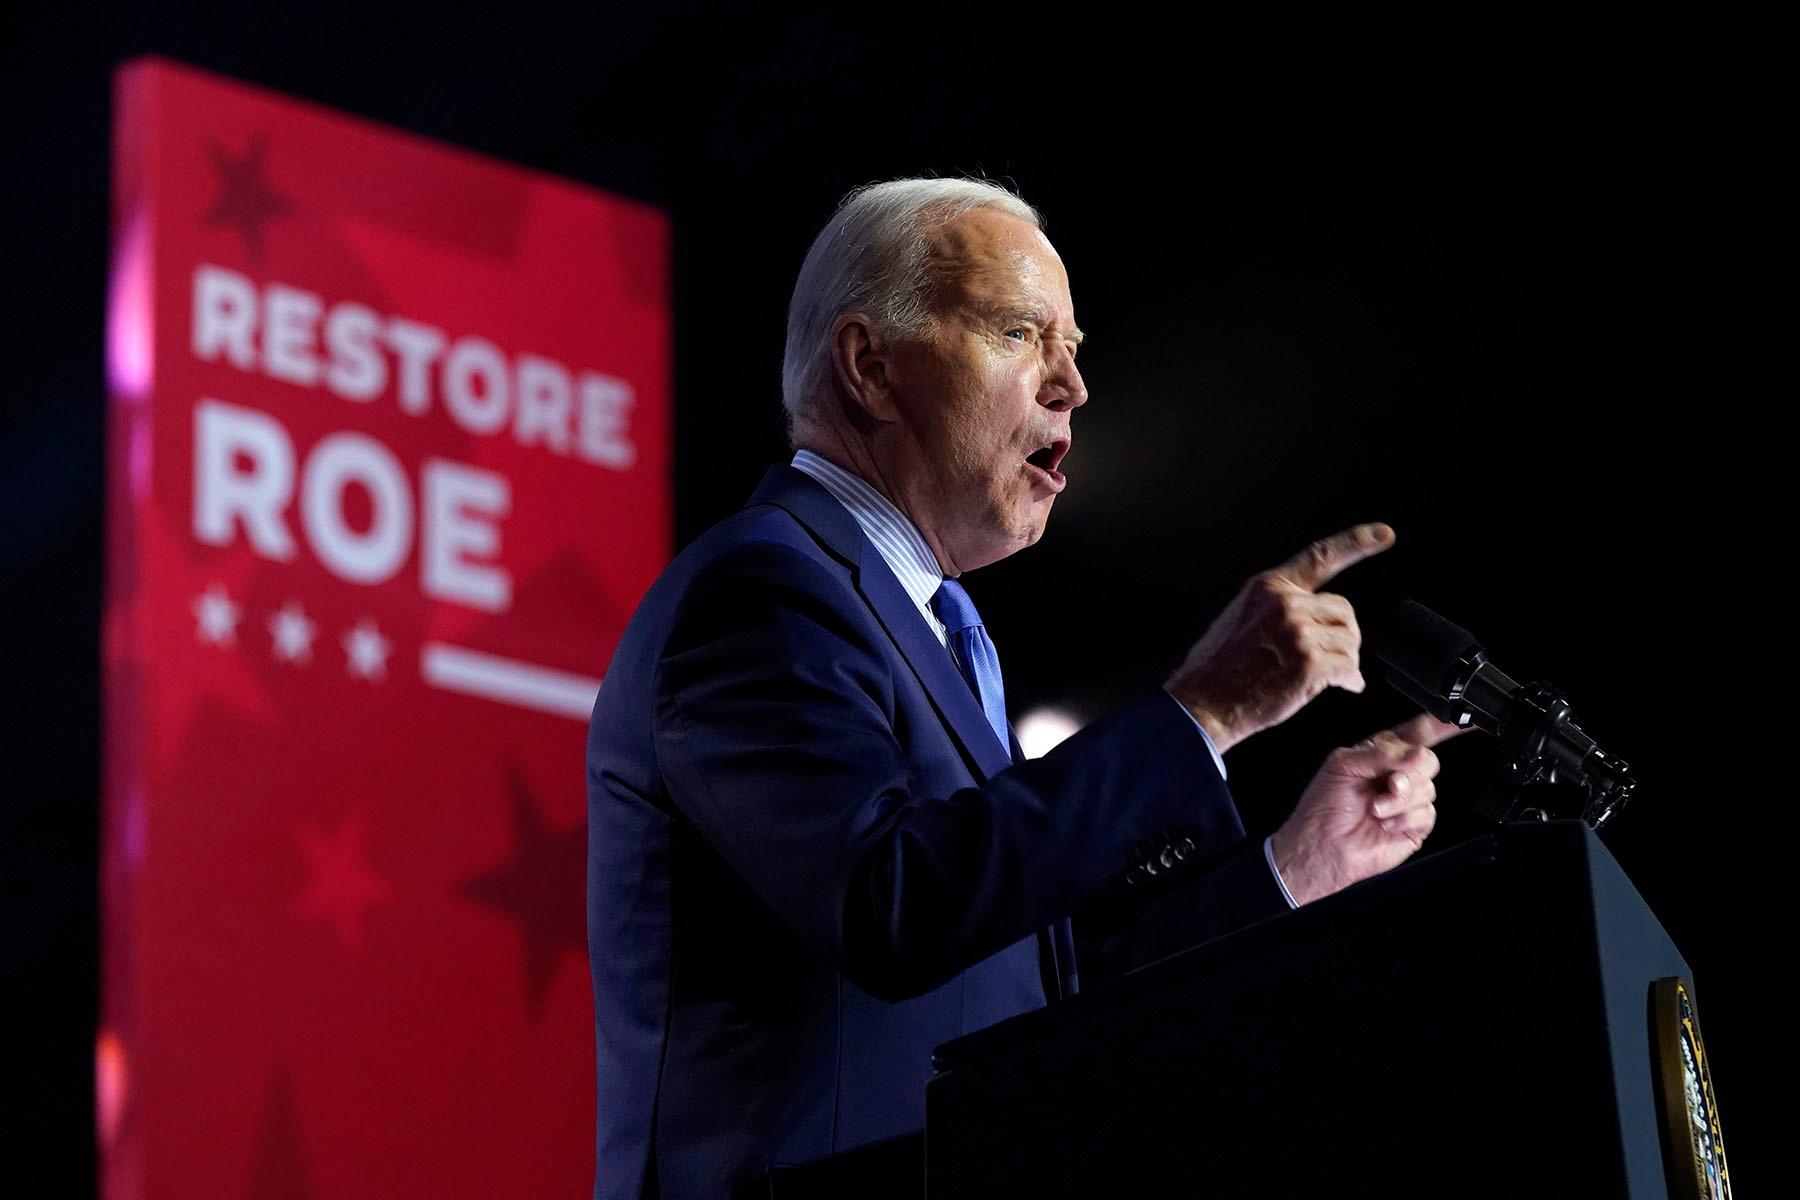 President Biden speaks during an event. Behind him a panel reads "Restore Roe."